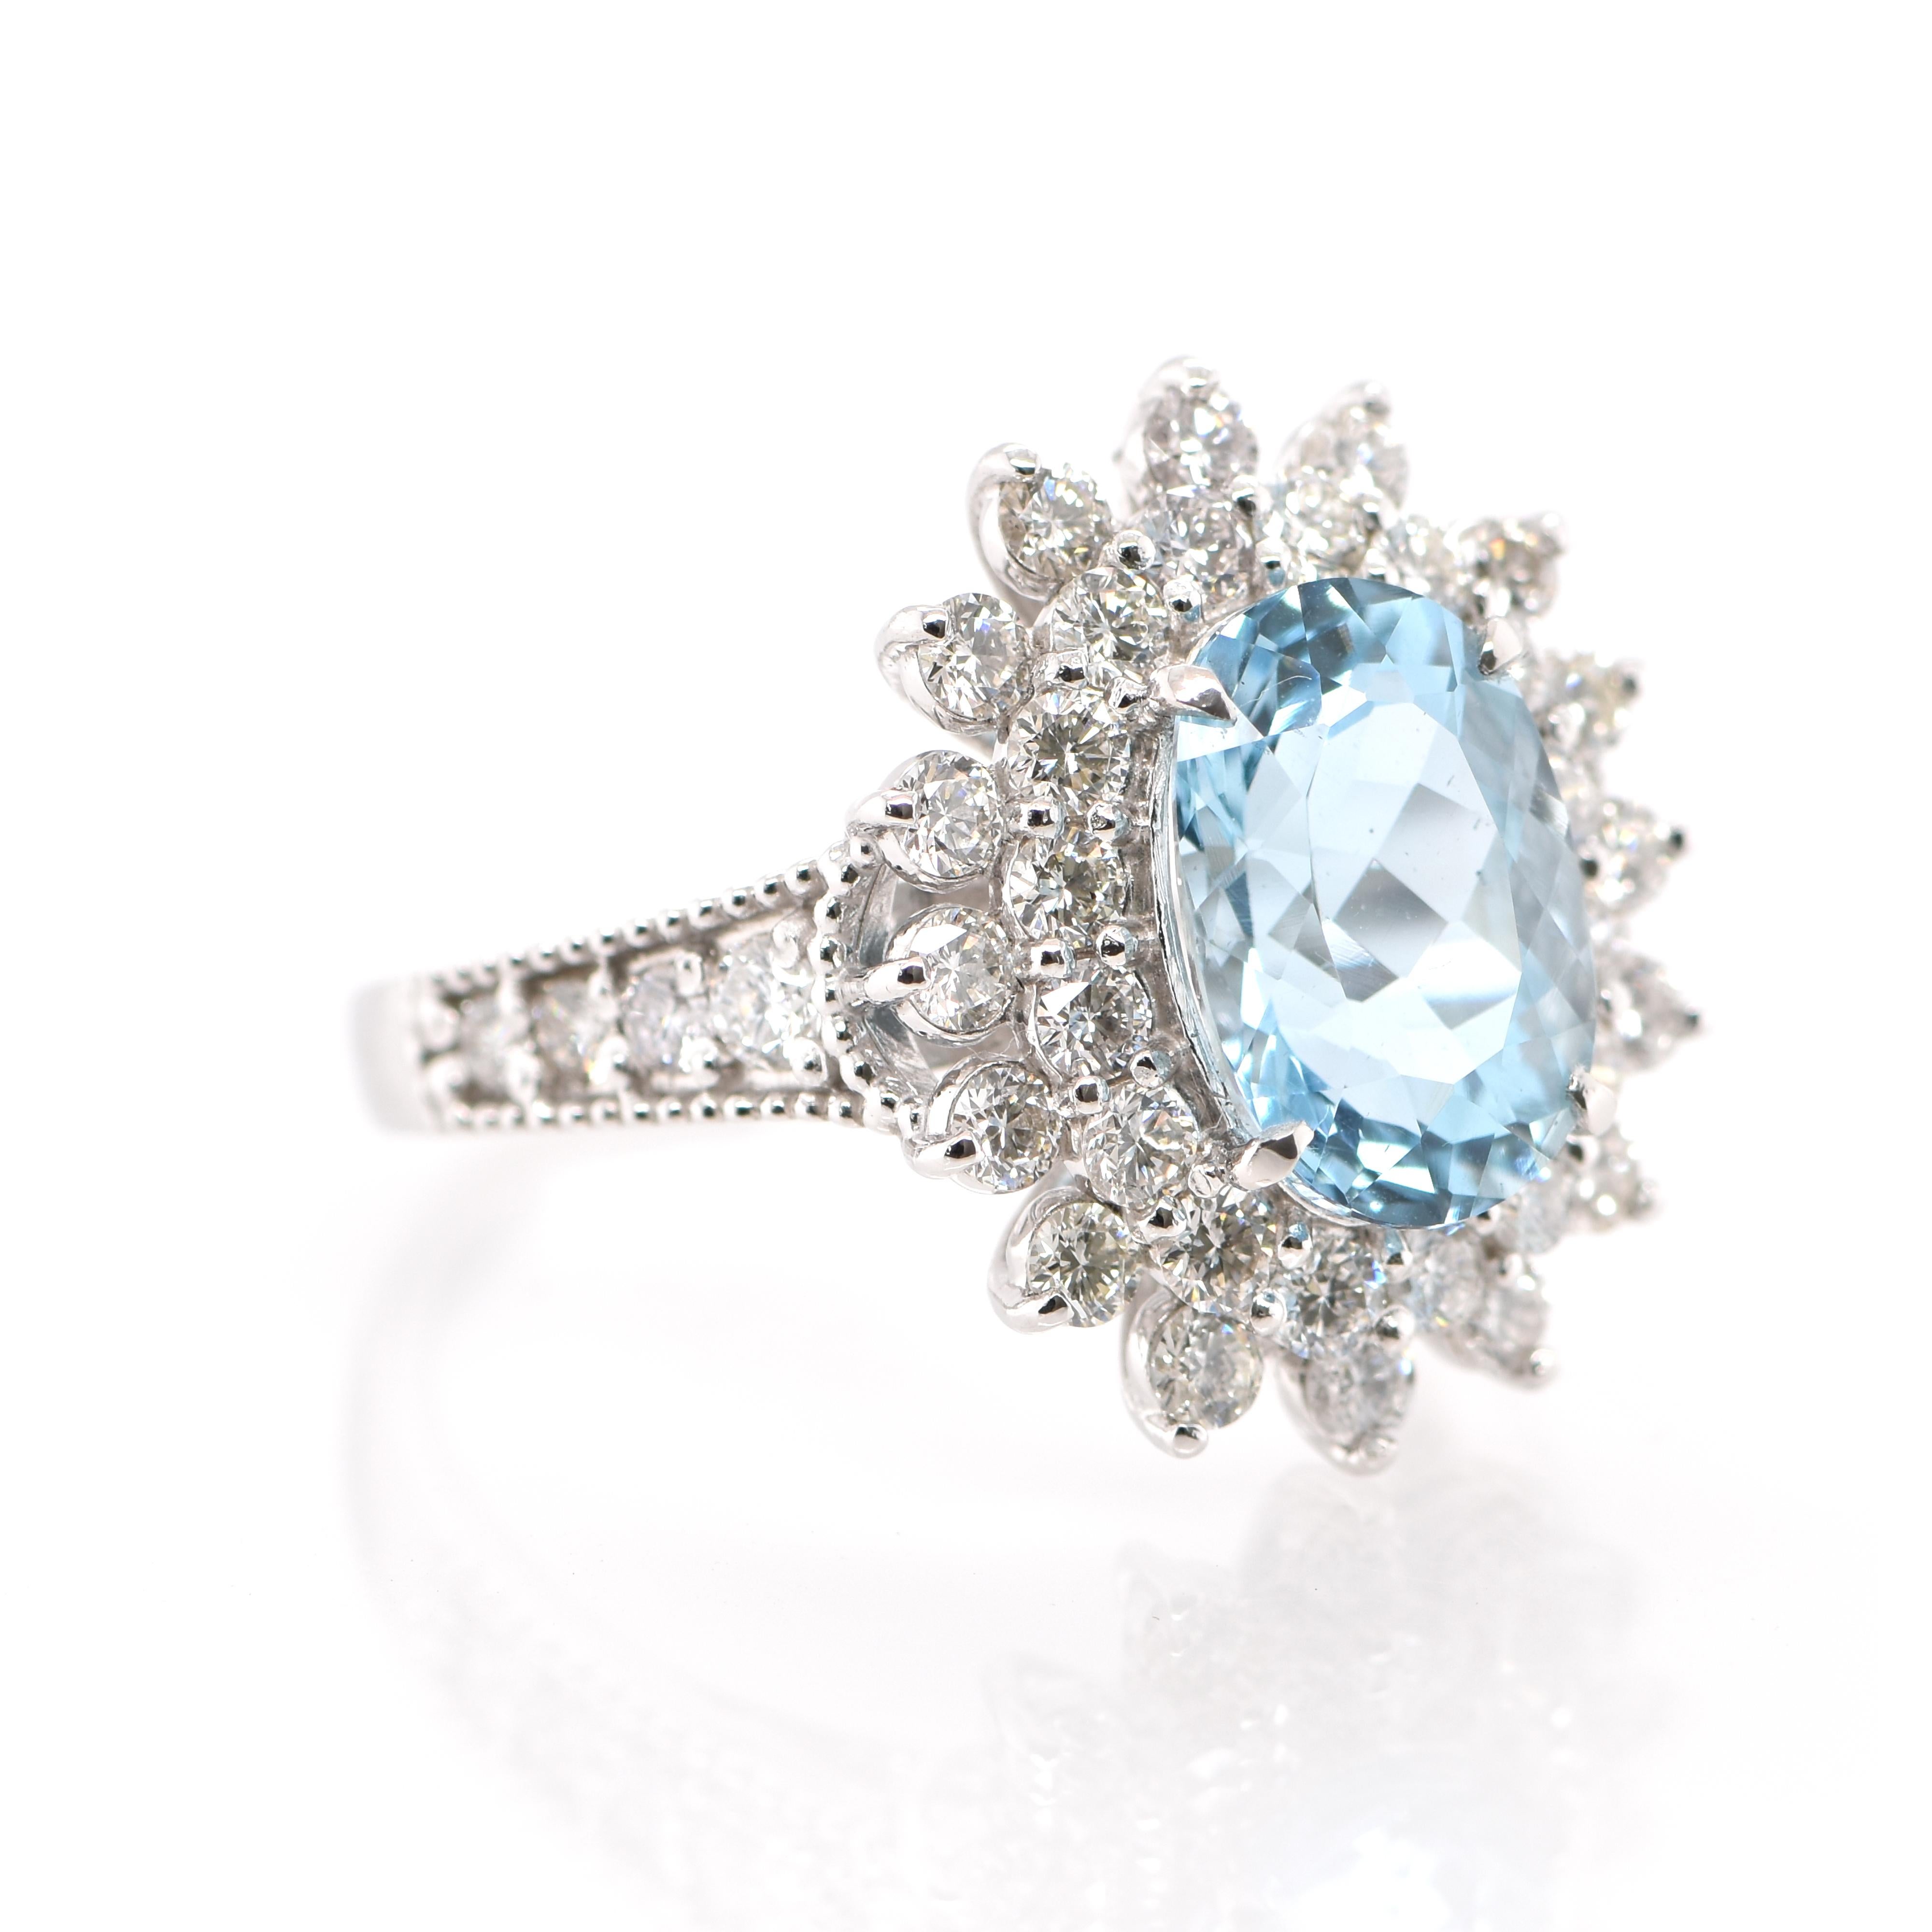 Modern 2.42 Carat Natural Aquamarine and Diamond Double Halo Ring Set in Platinum For Sale